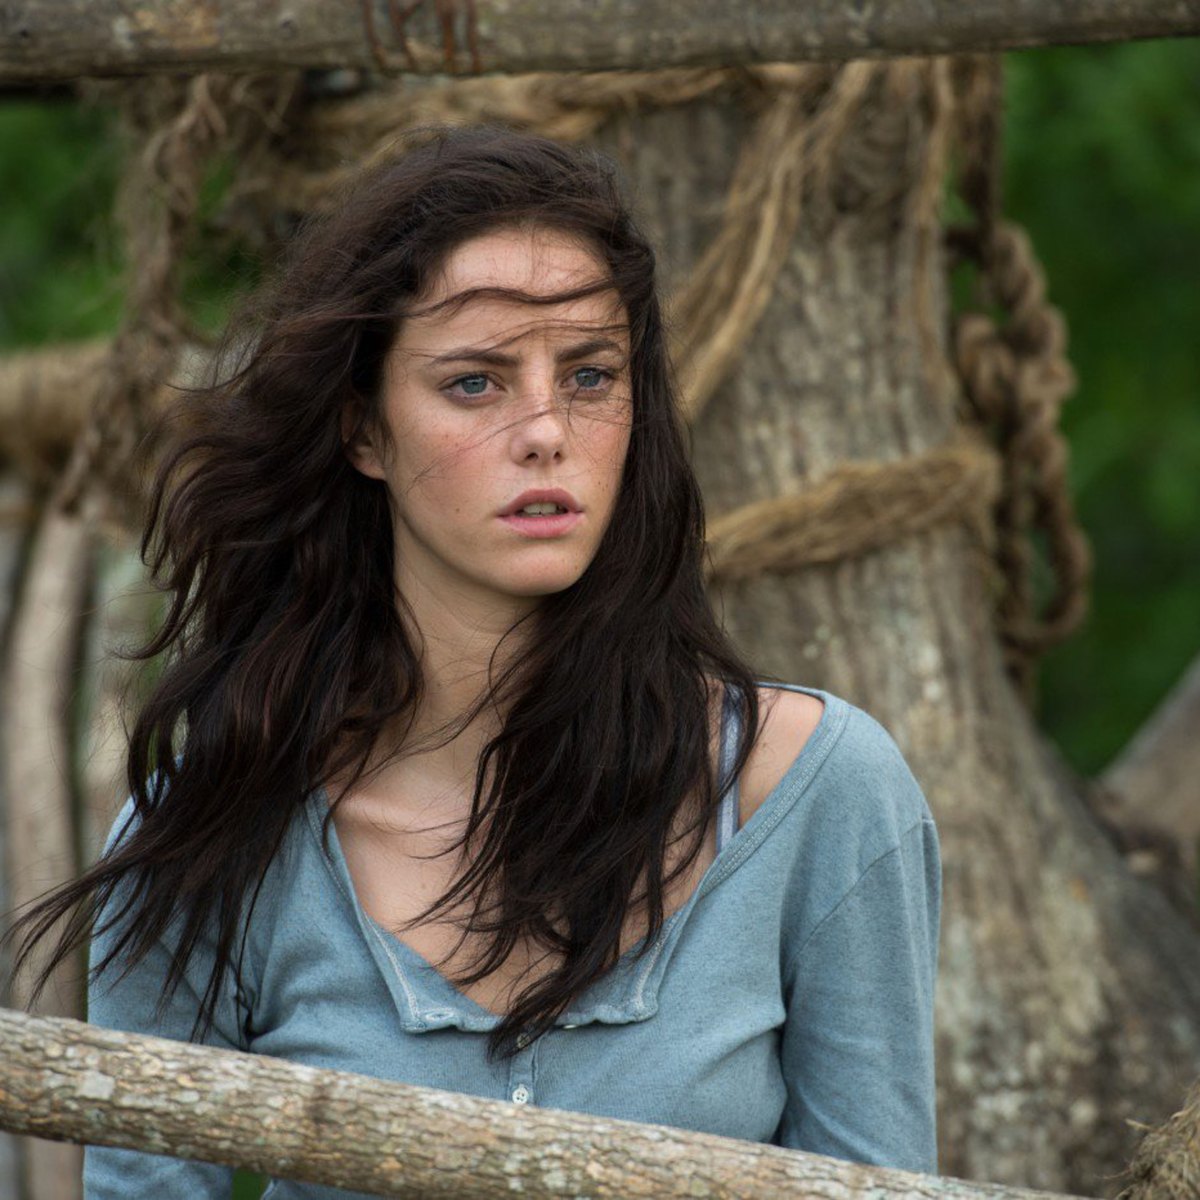 The Cast of The Maze Runner Reveals Which Celebrity They'd Want To Be Stuck  in a Maze With